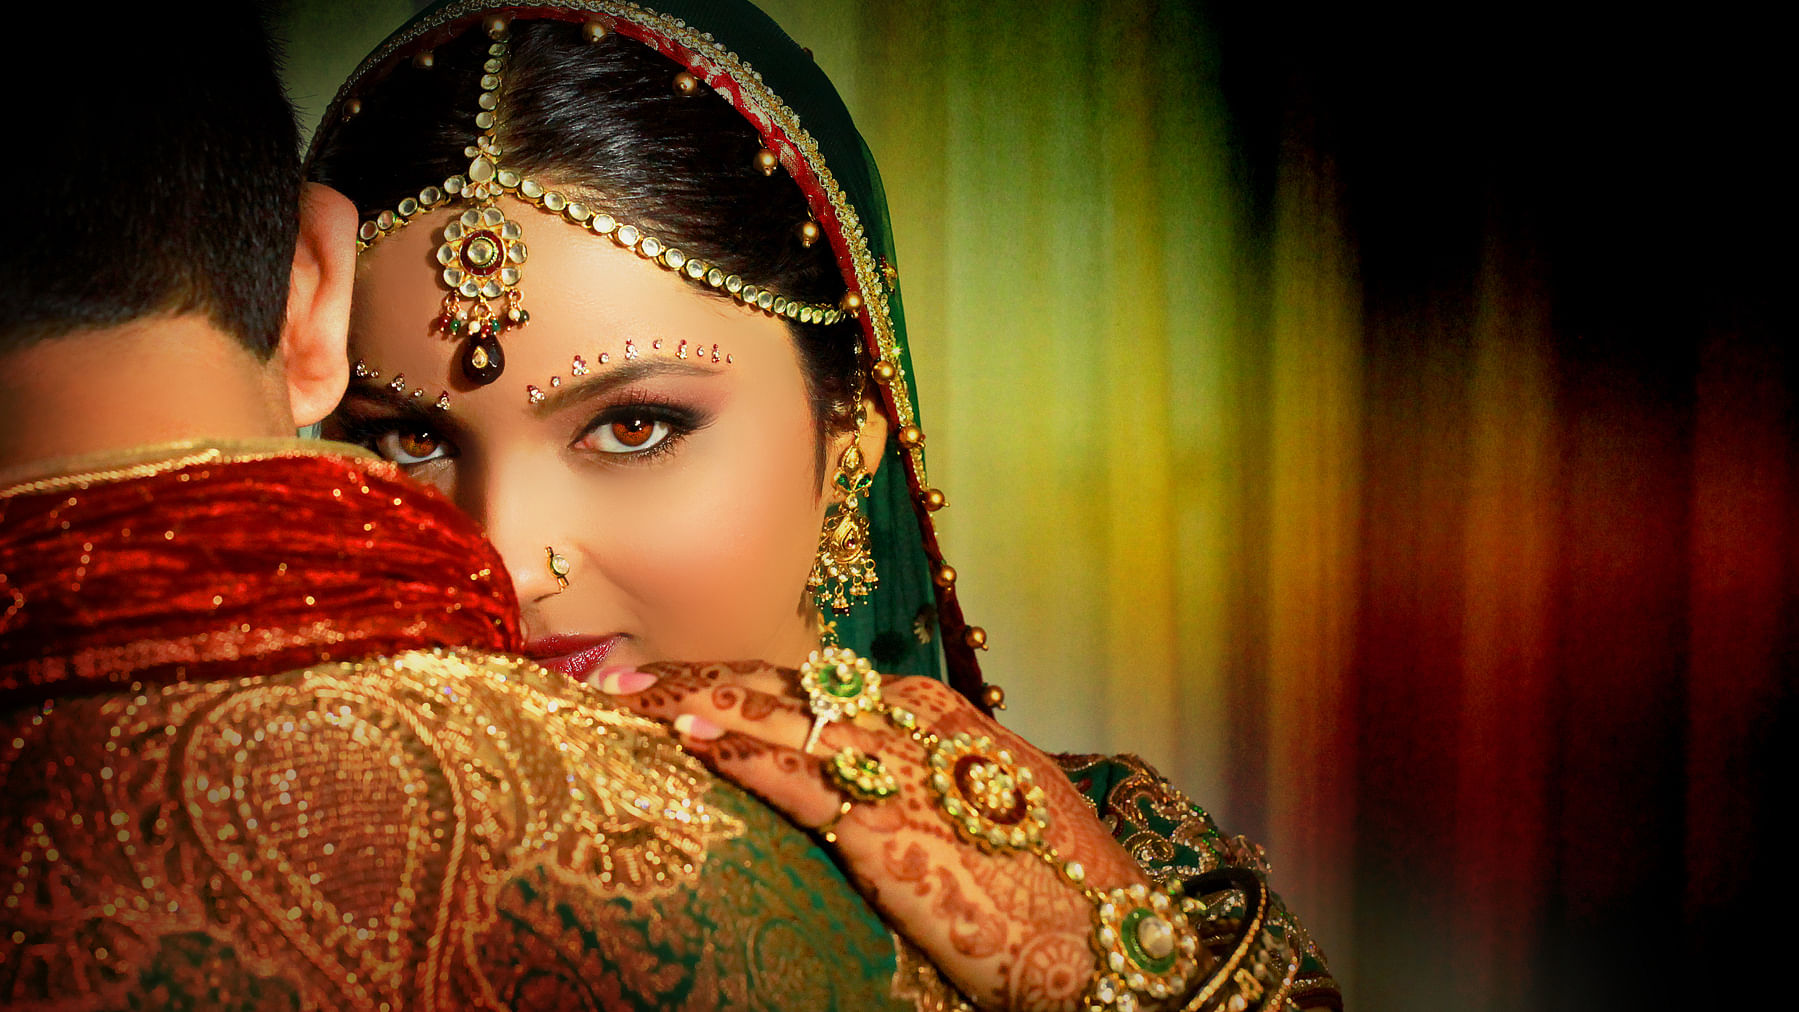 How to get the best glow for your monsoon wedding. (Photo: iStock)